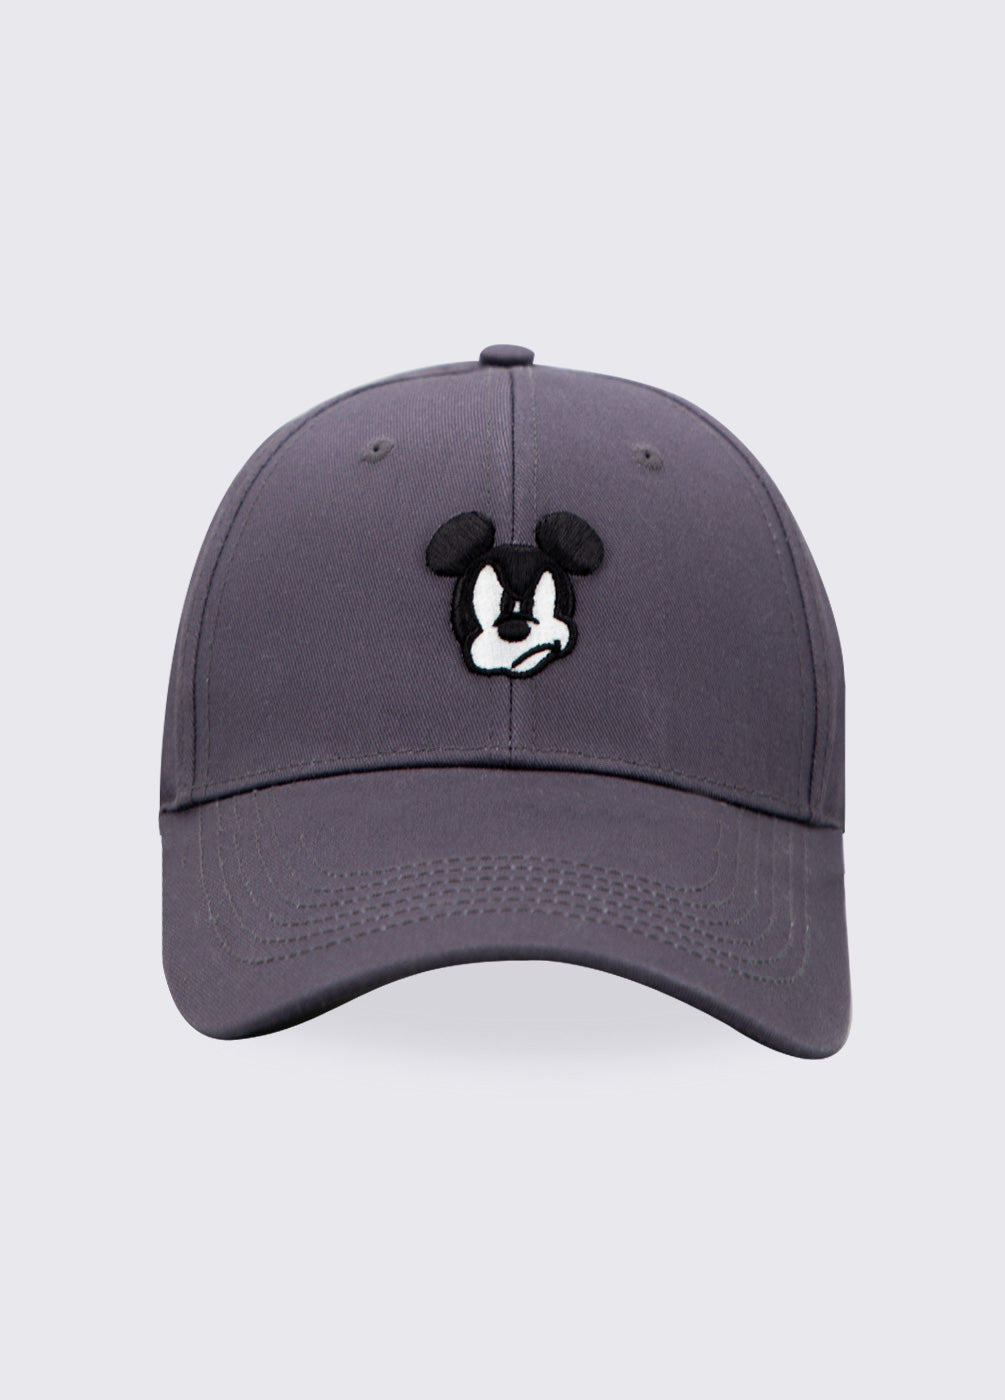 Gorra Disney: Mickey Mouse - Angry | Epicland